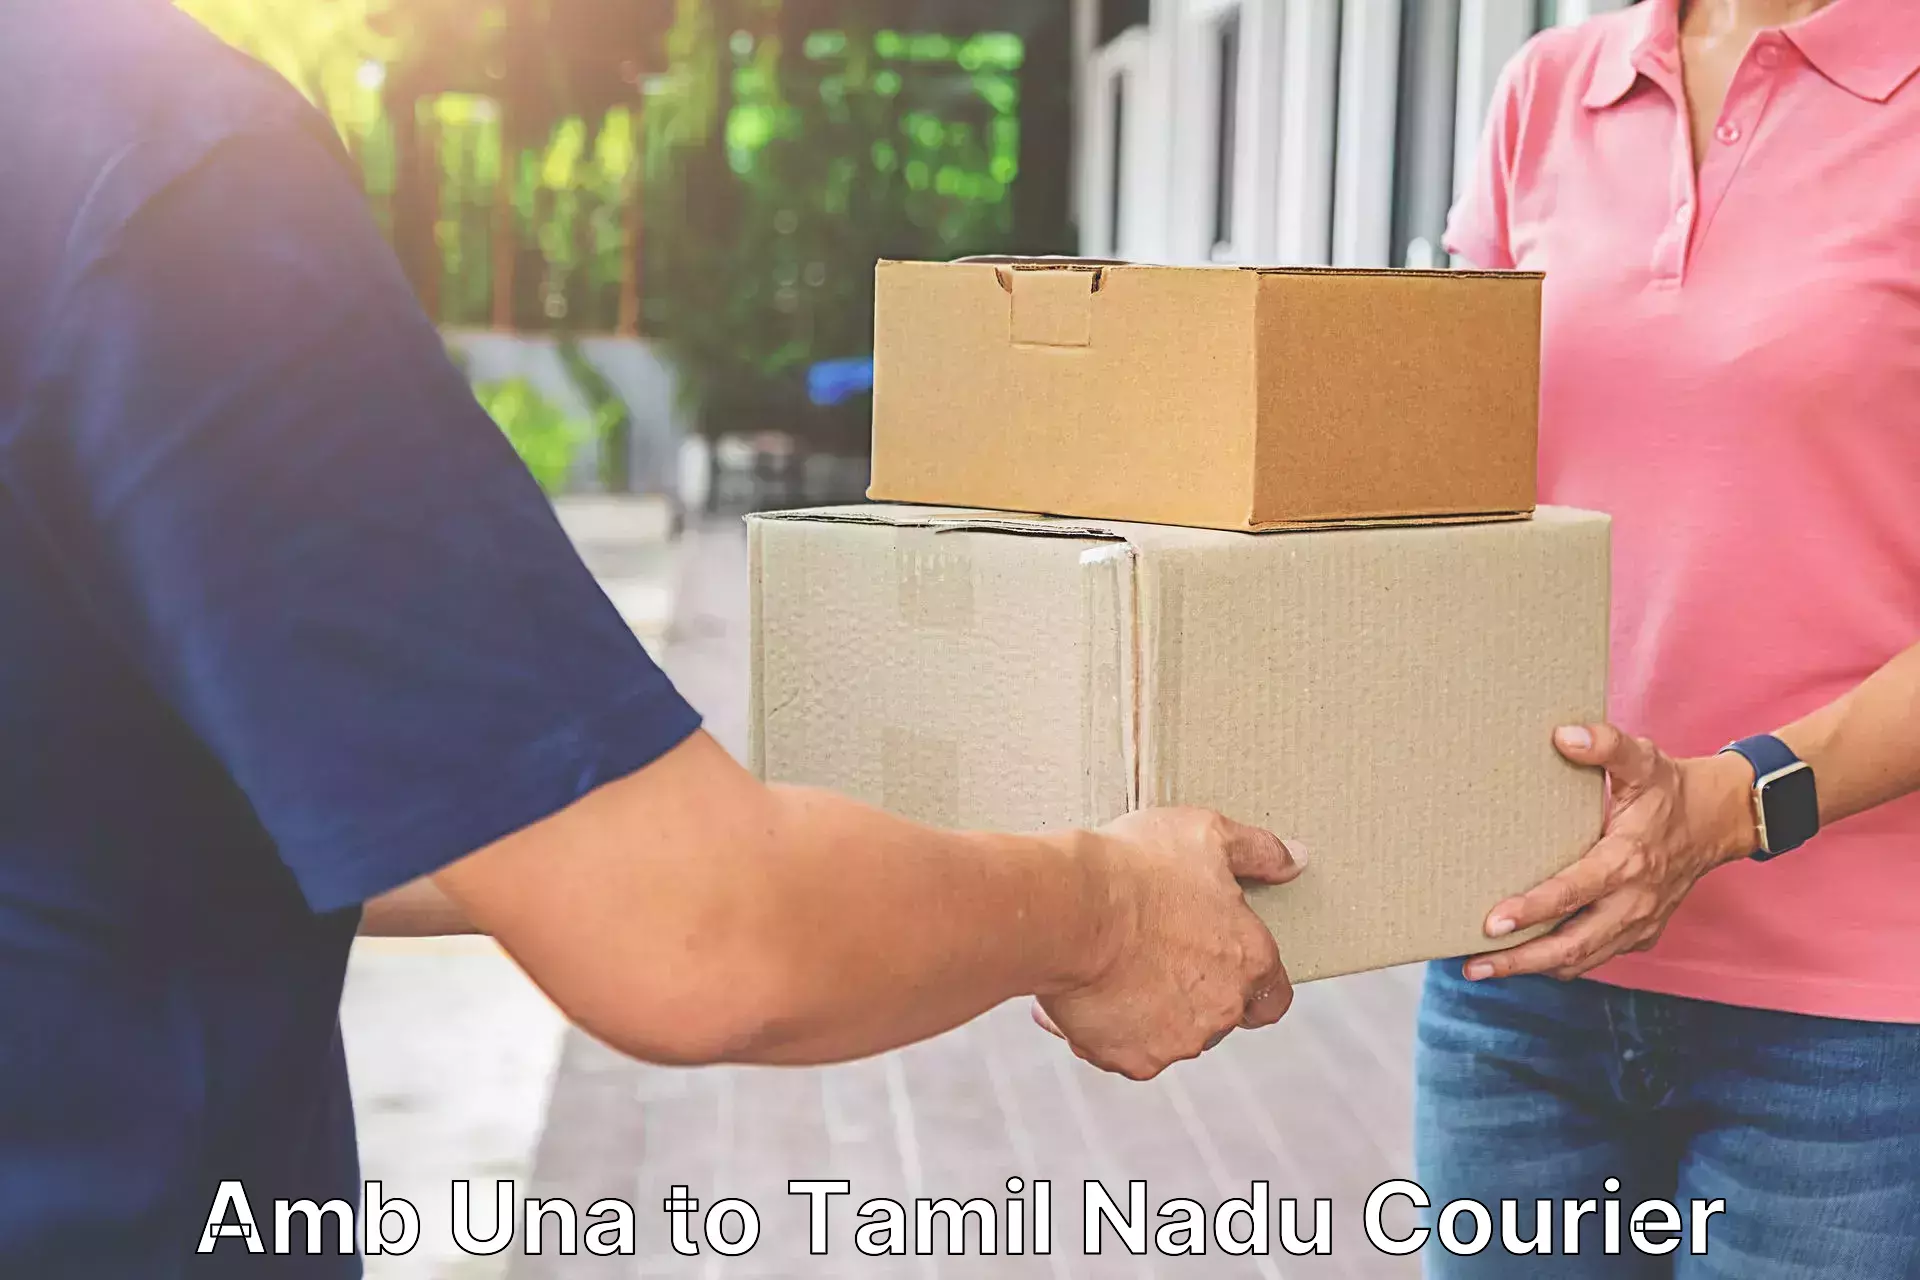 State-of-the-art courier technology Amb Una to Tamil Nadu